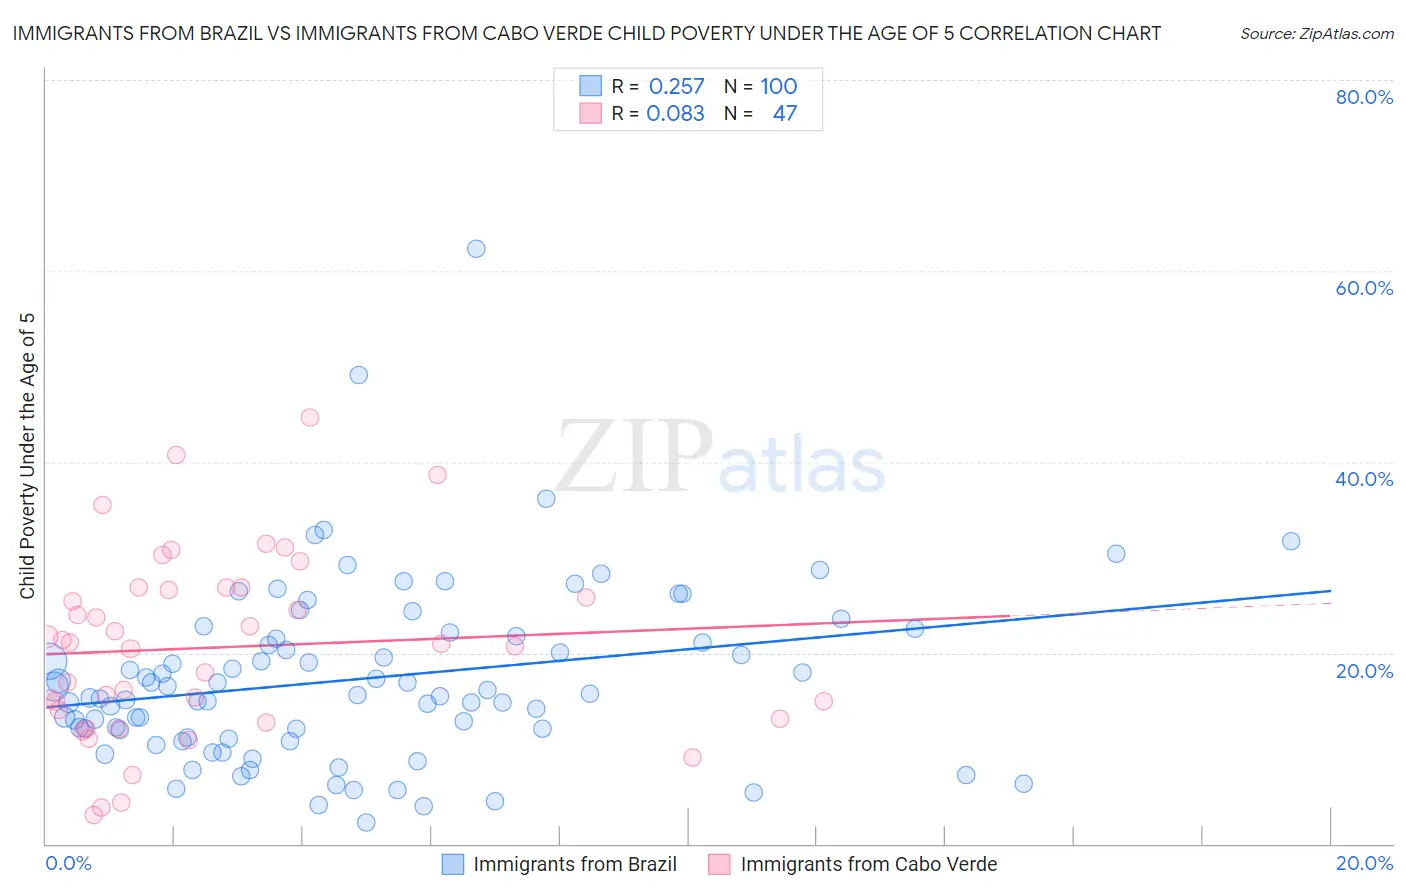 Immigrants from Brazil vs Immigrants from Cabo Verde Child Poverty Under the Age of 5